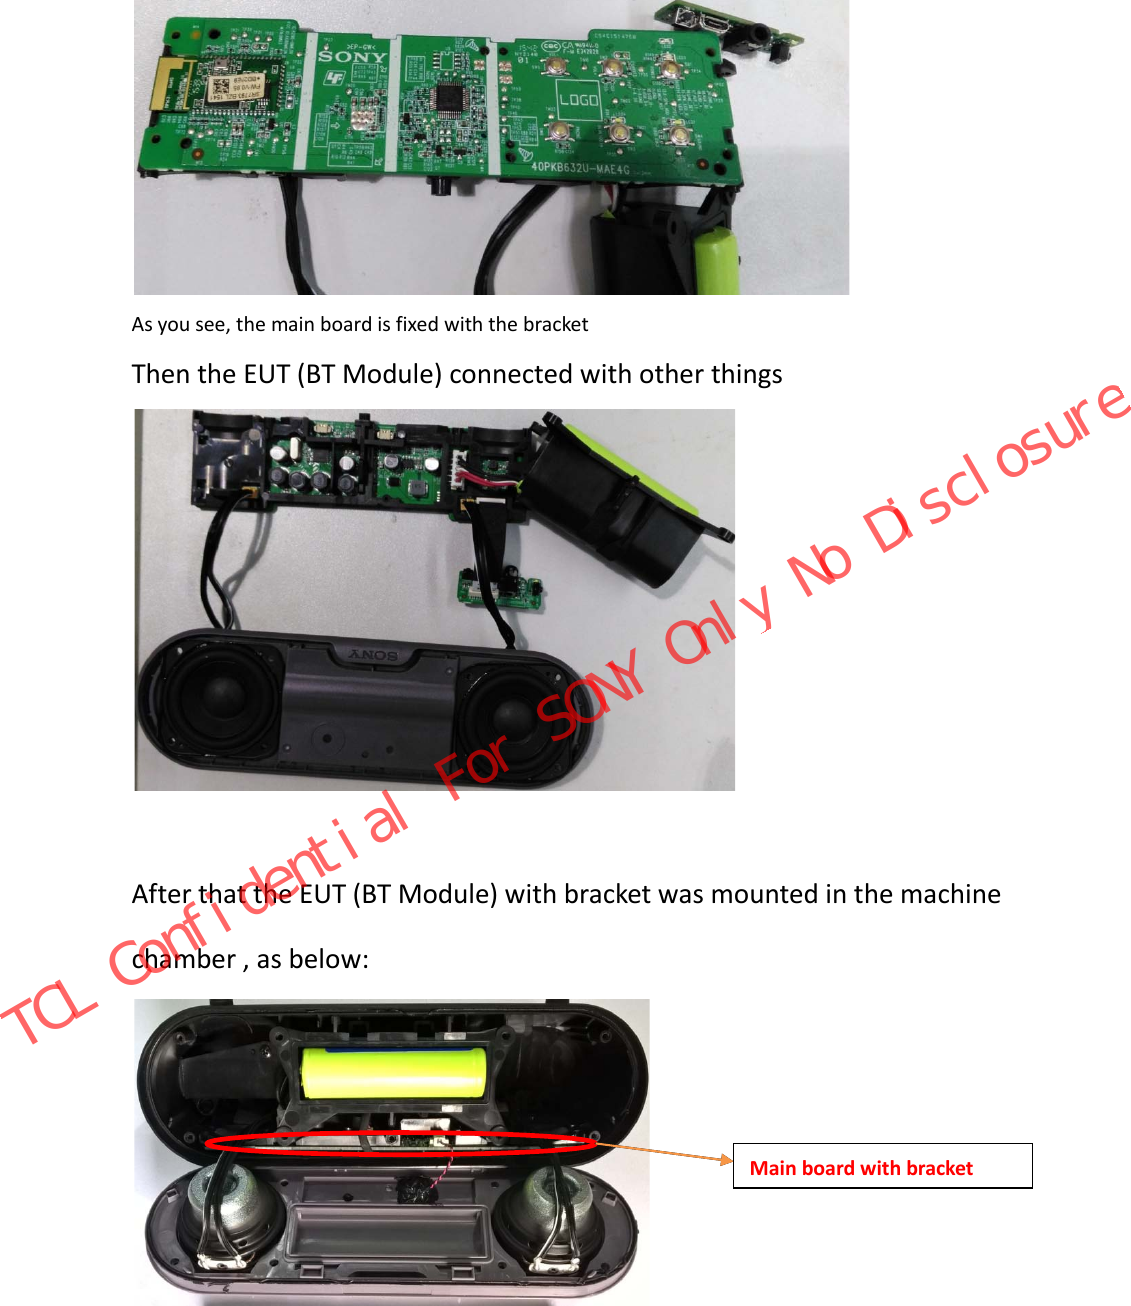  As you see, the main board is fixed with the bracket Then the EUT (BT Module) connected with other things   After that the EUT (BT Module) with bracket was mounted in the machine chamber , as below:    Main board with bracket TCL Confidential For SONY Only No Disclosure